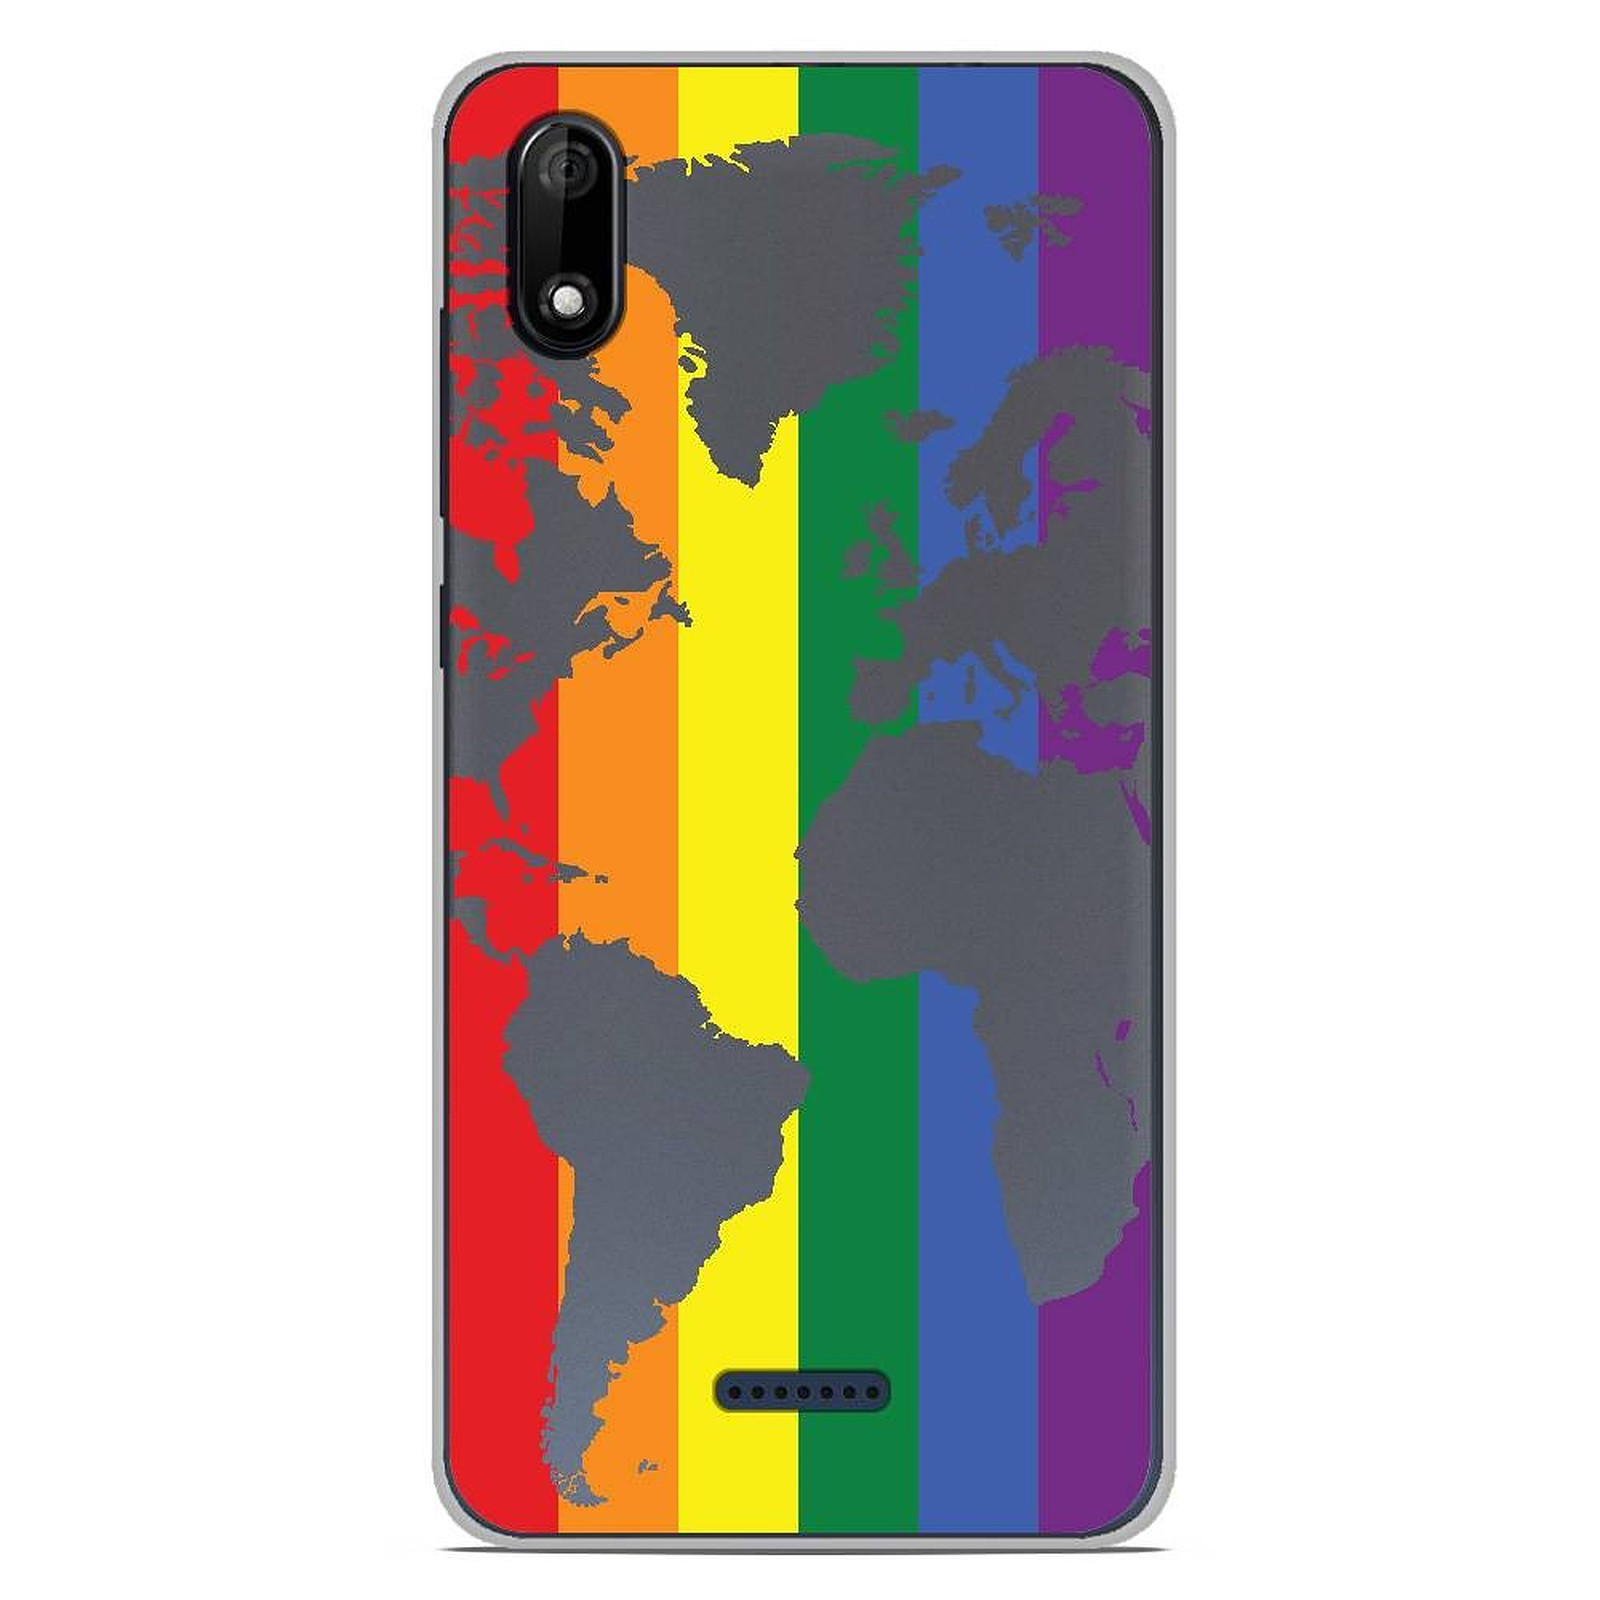 1001 Coques Coque silicone gel Wiko Y60 motif Map LGBT - Coque telephone 1001Coques